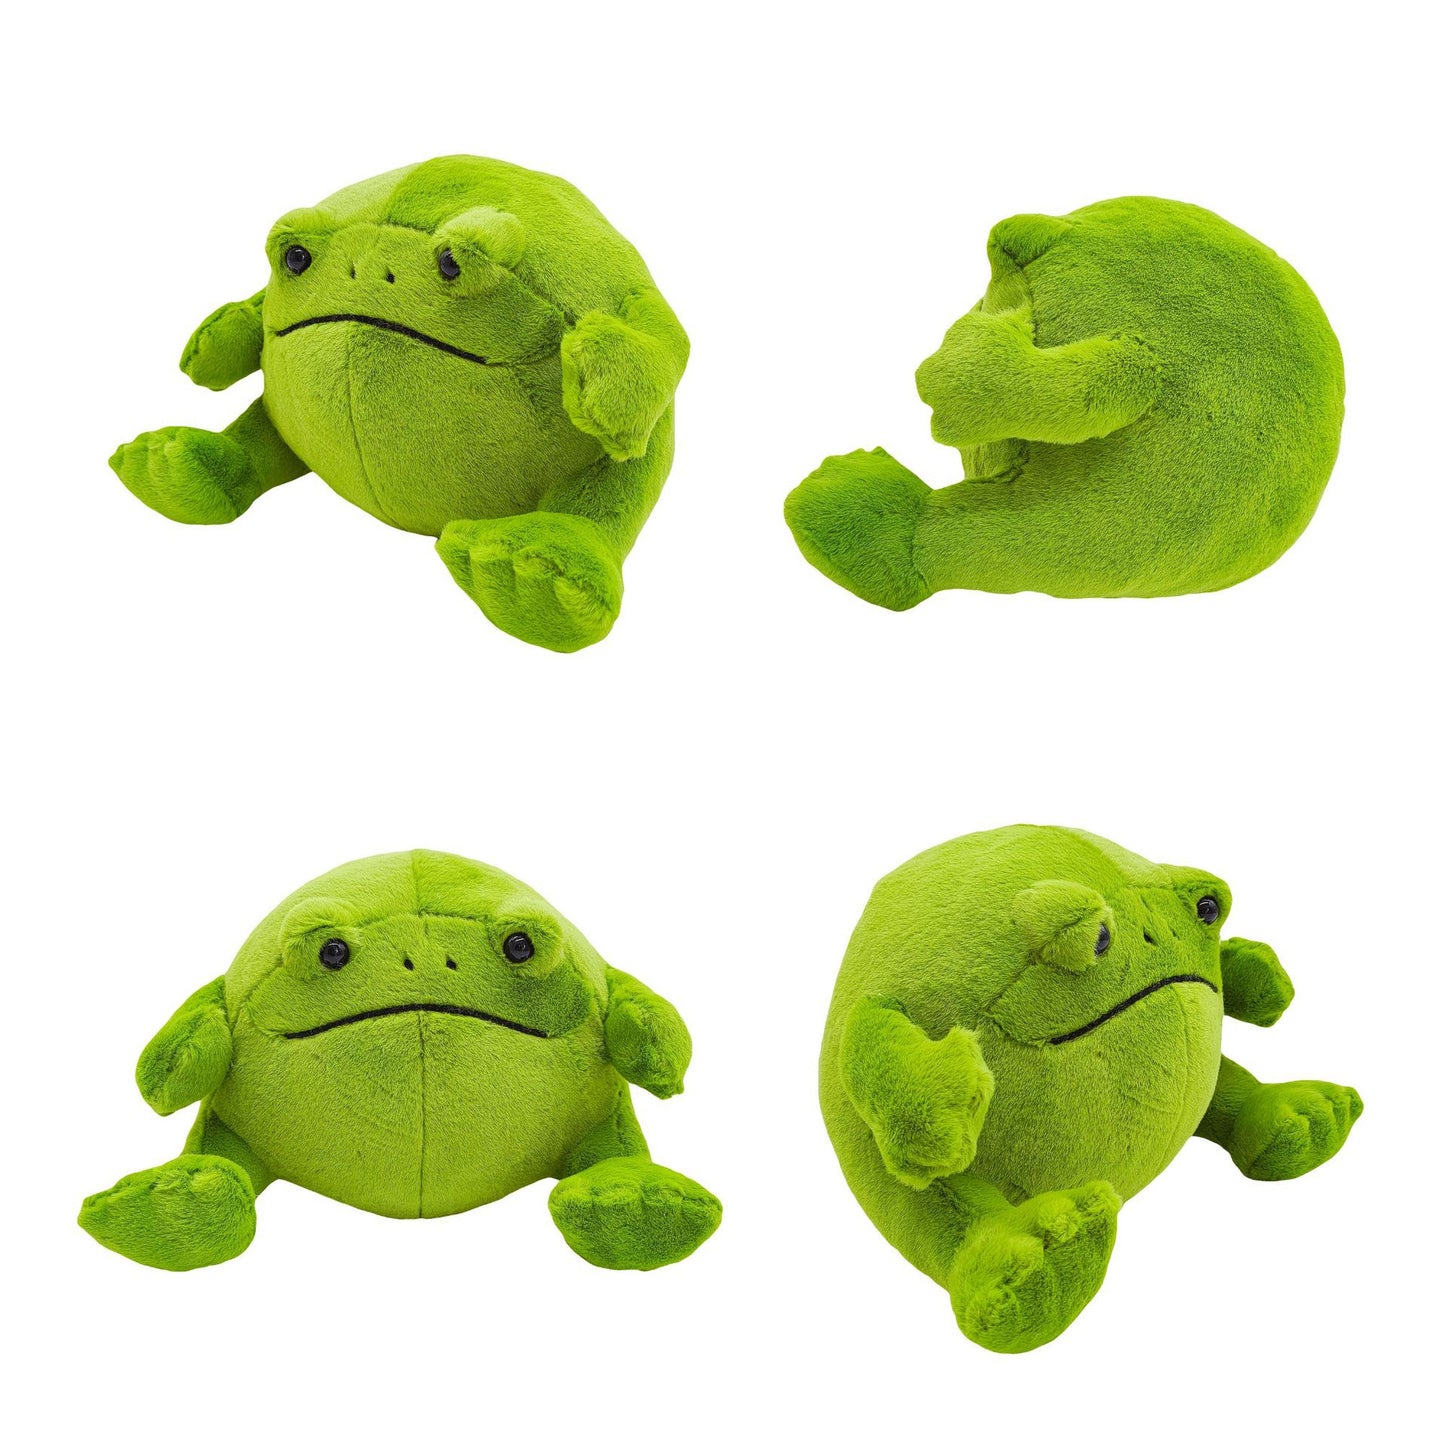 Kawaii Ricky Rain Frog Plush Toy Super Soft Stuffed Animal Lovely Frog Doll Baby Toys Plushie Gift Toy for Children Gifts